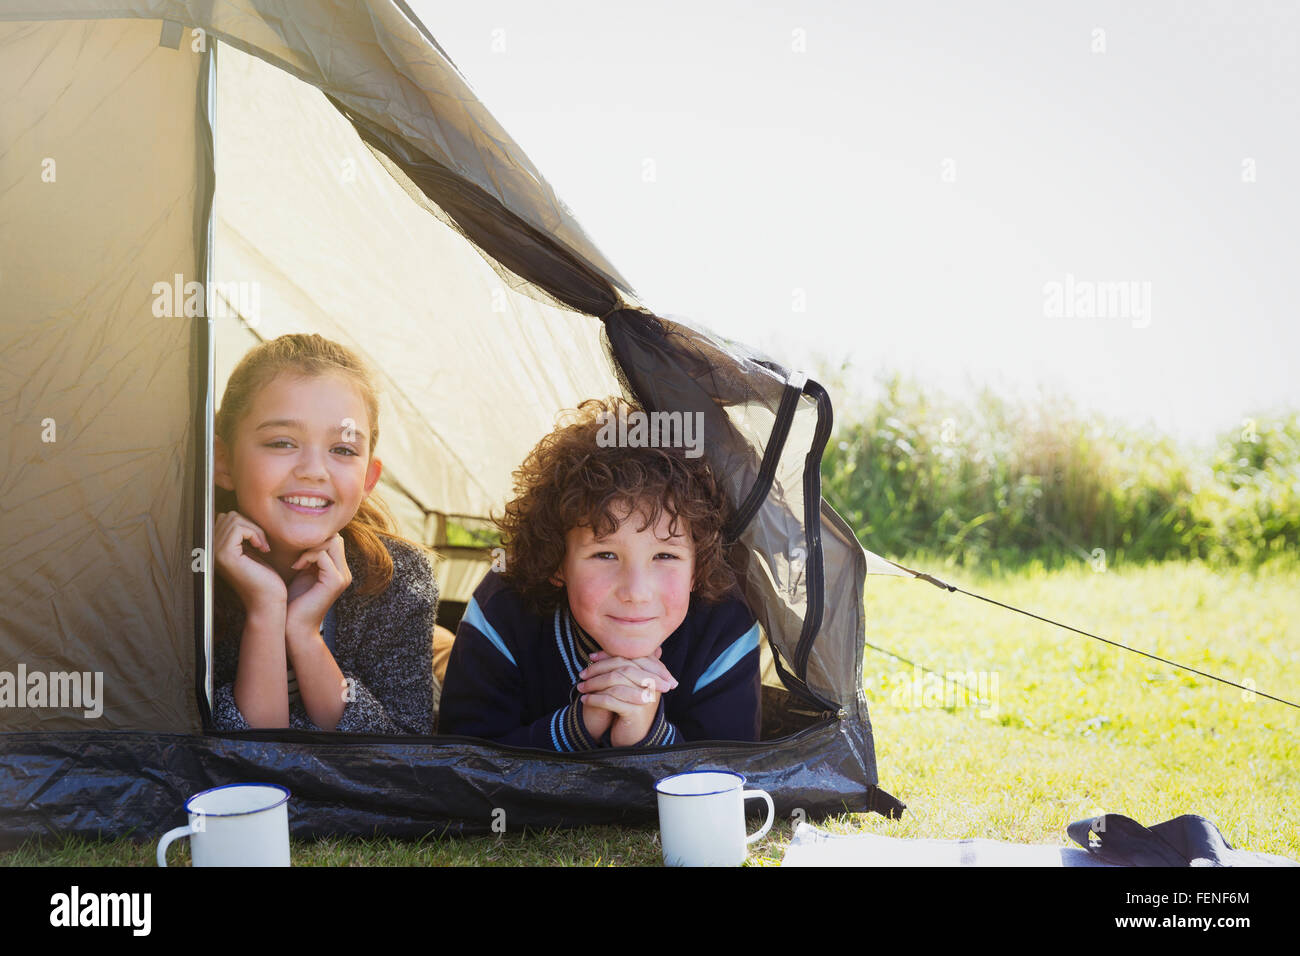 Portrait smiling brother and sister in tent Stock Photo